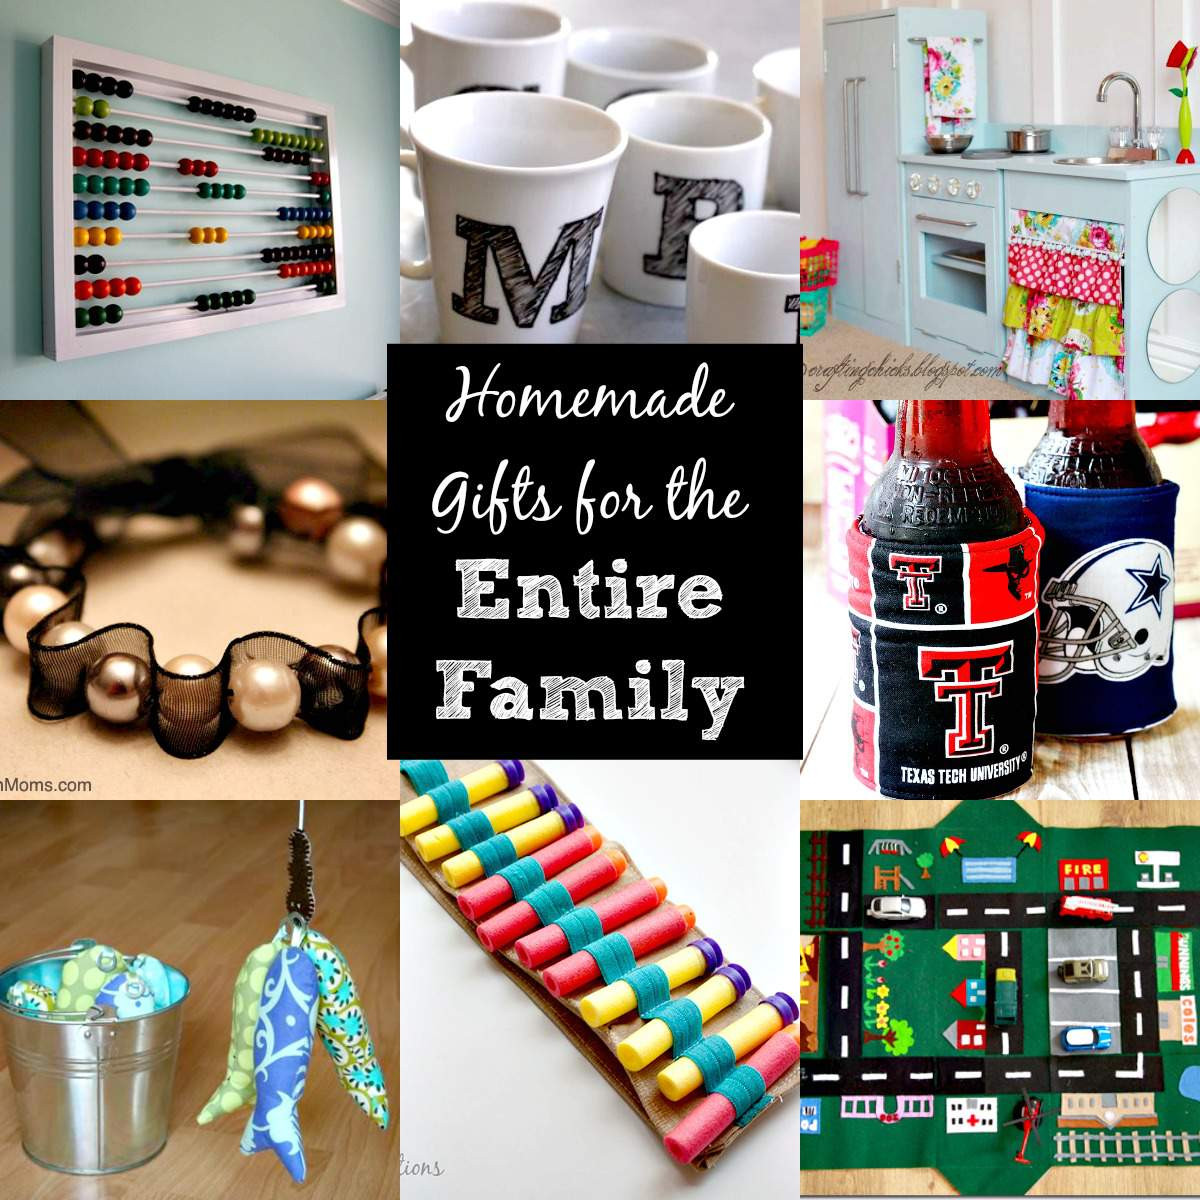 DIY Family Gift
 DIY Christmas Gift Ideas for the Entire Family – over 30